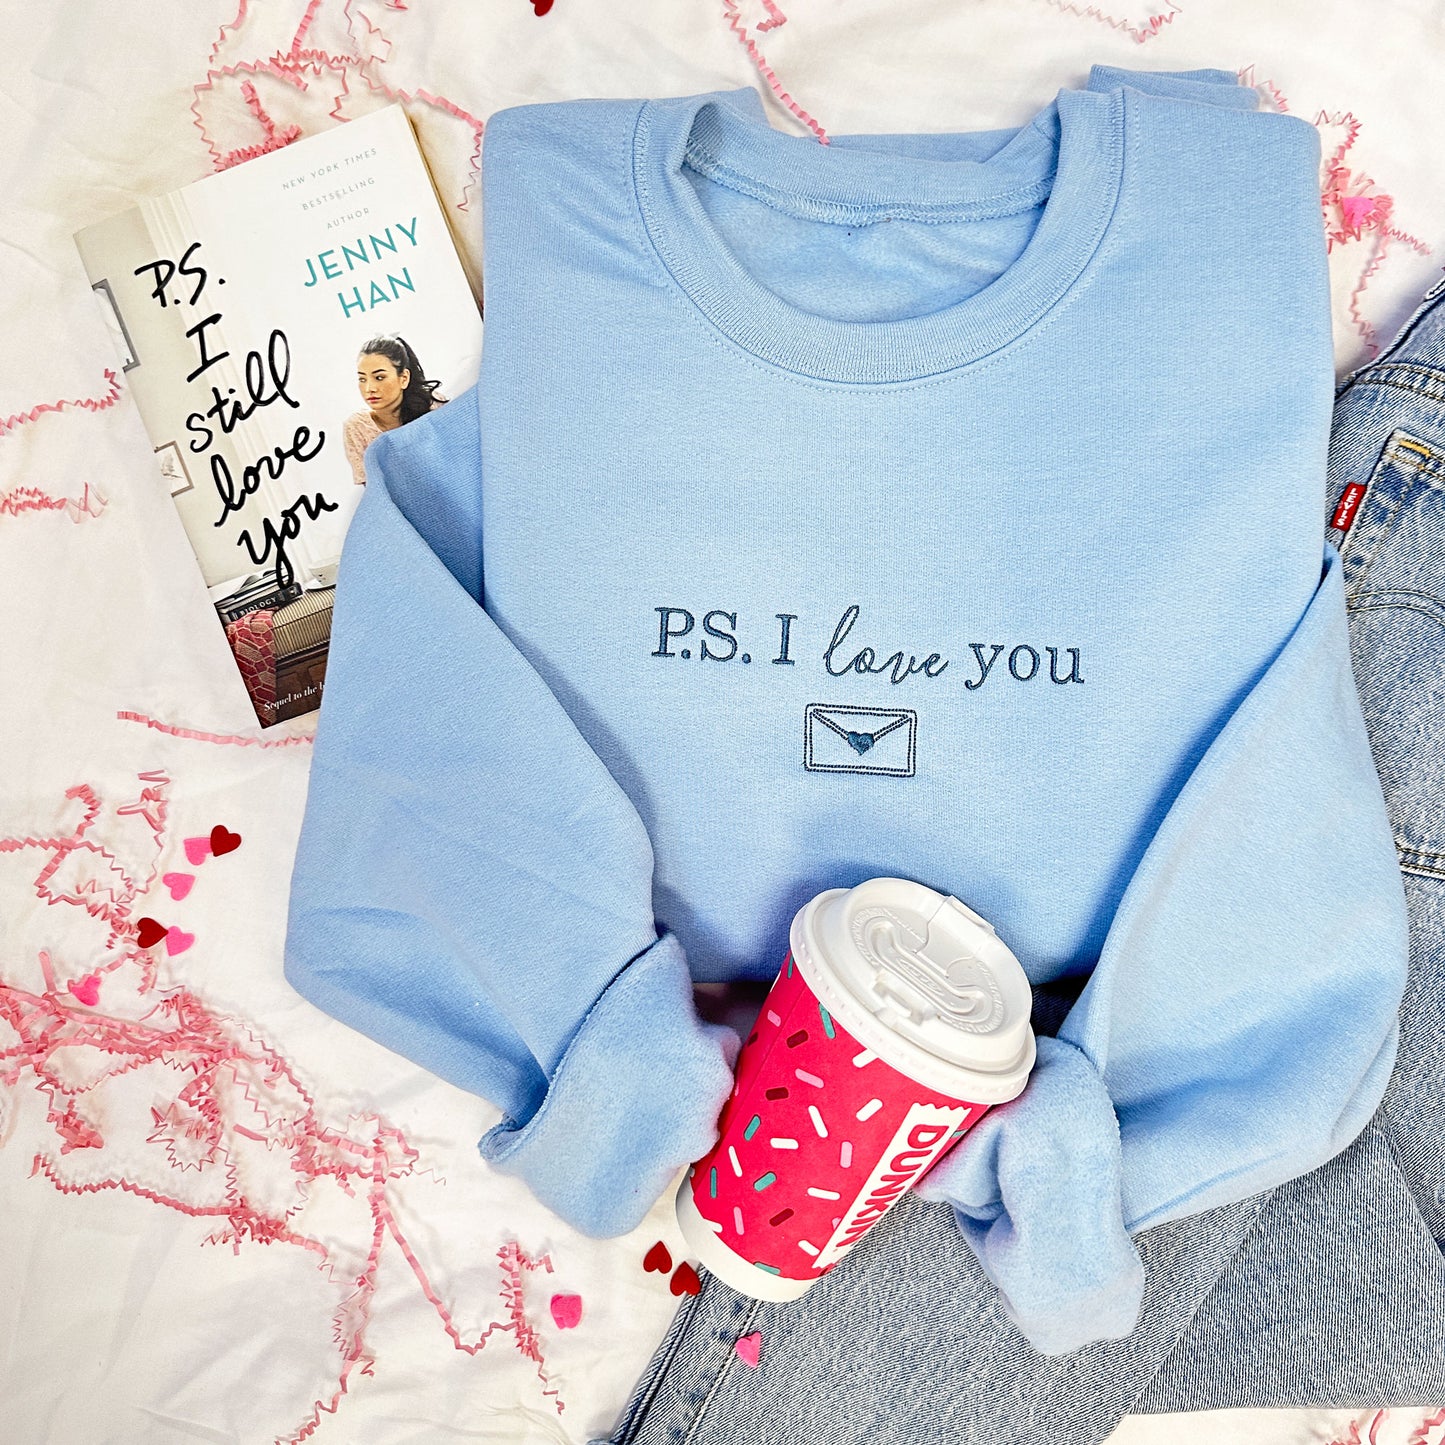 light blue crewneck sweatshirt with a custom embroidery design that says P.S. I love you  in  a French Blue thread.